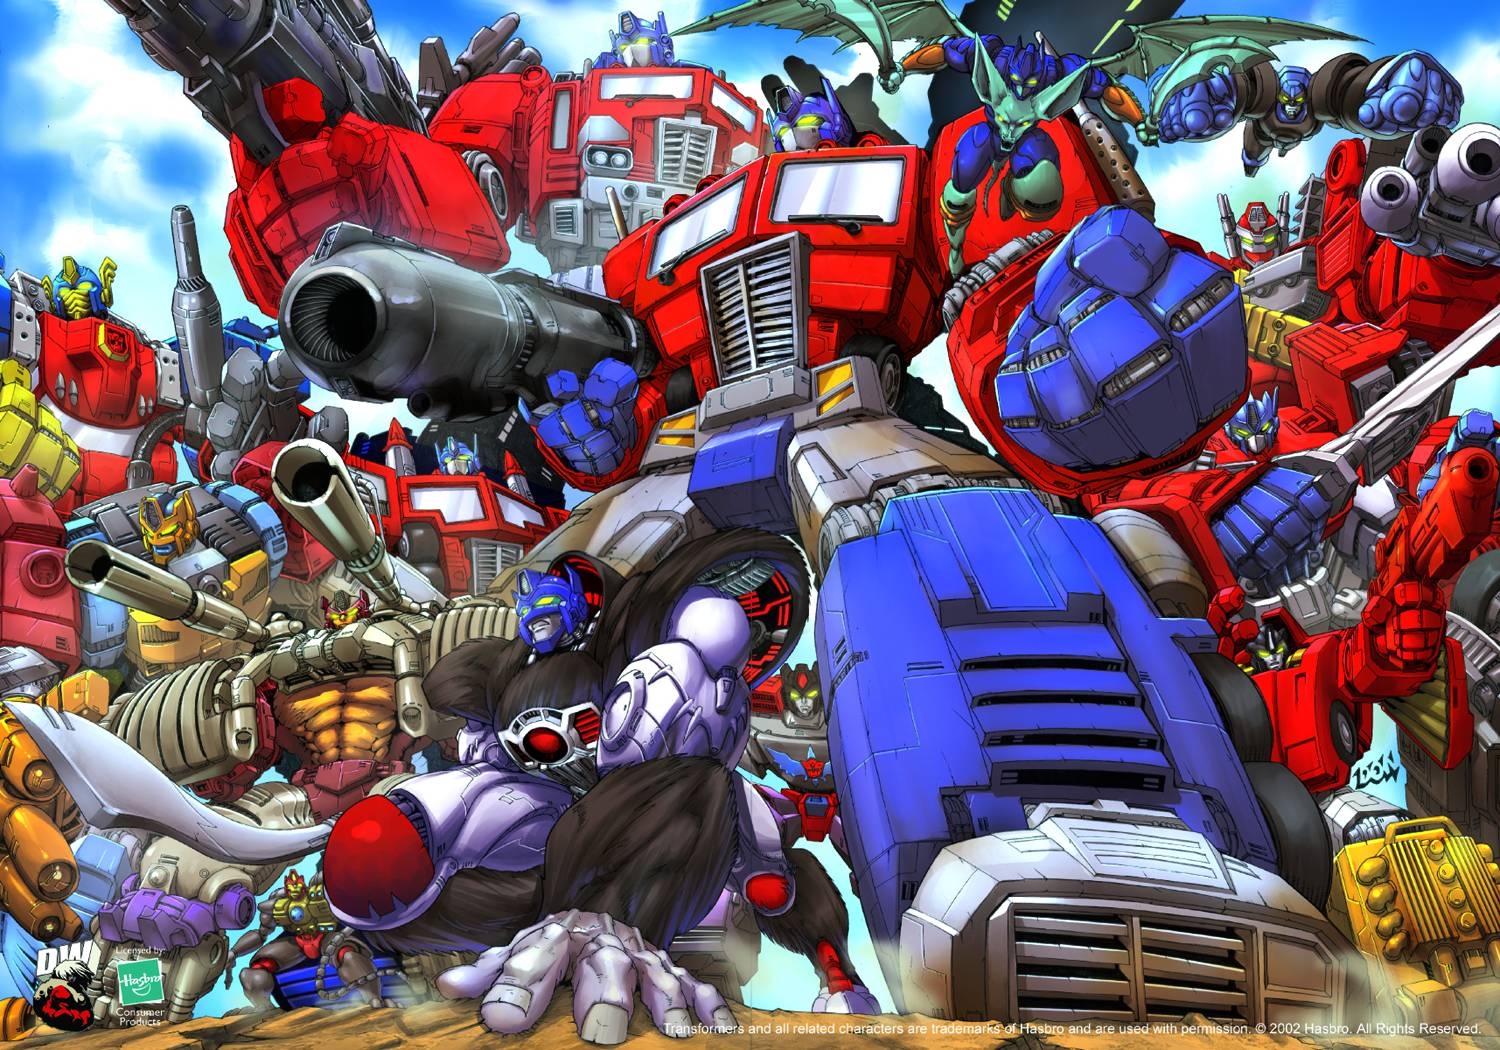 Transformers Background